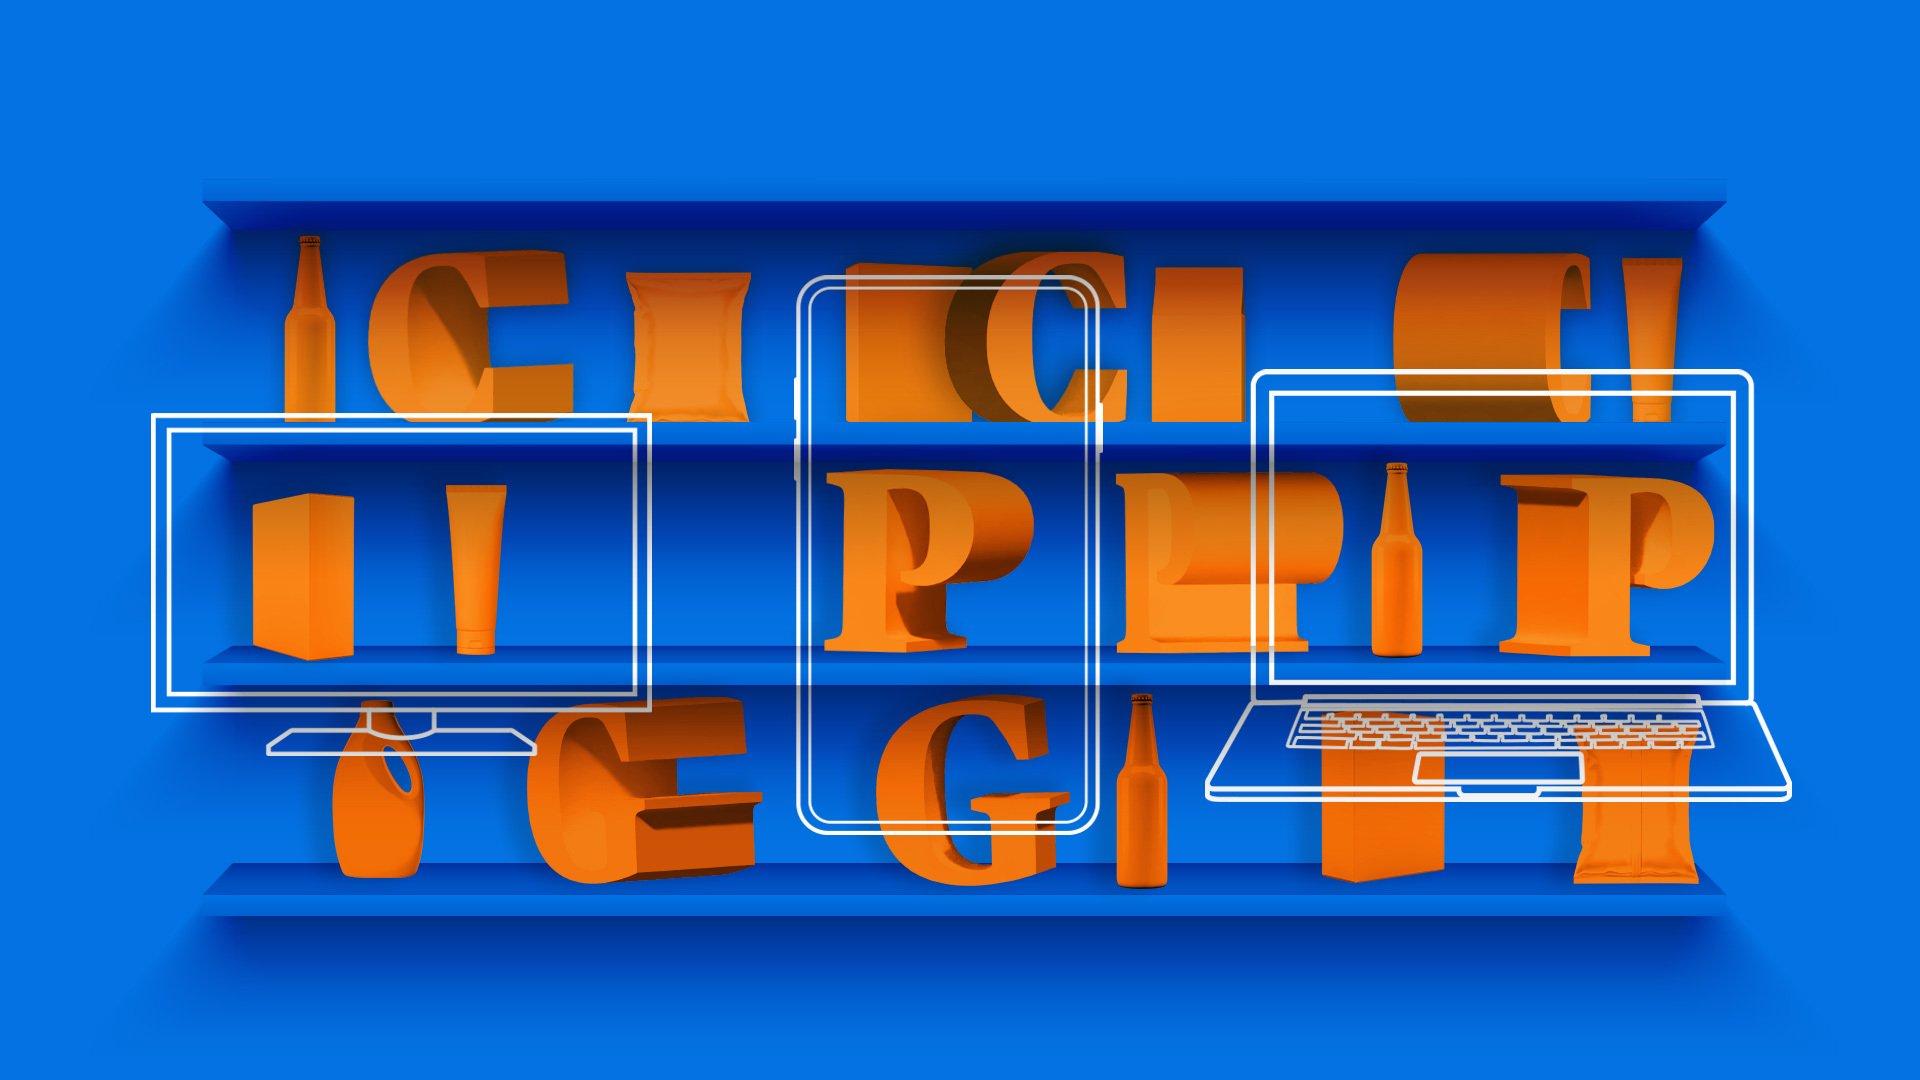 Various orange block letters with illustrated screens laying over